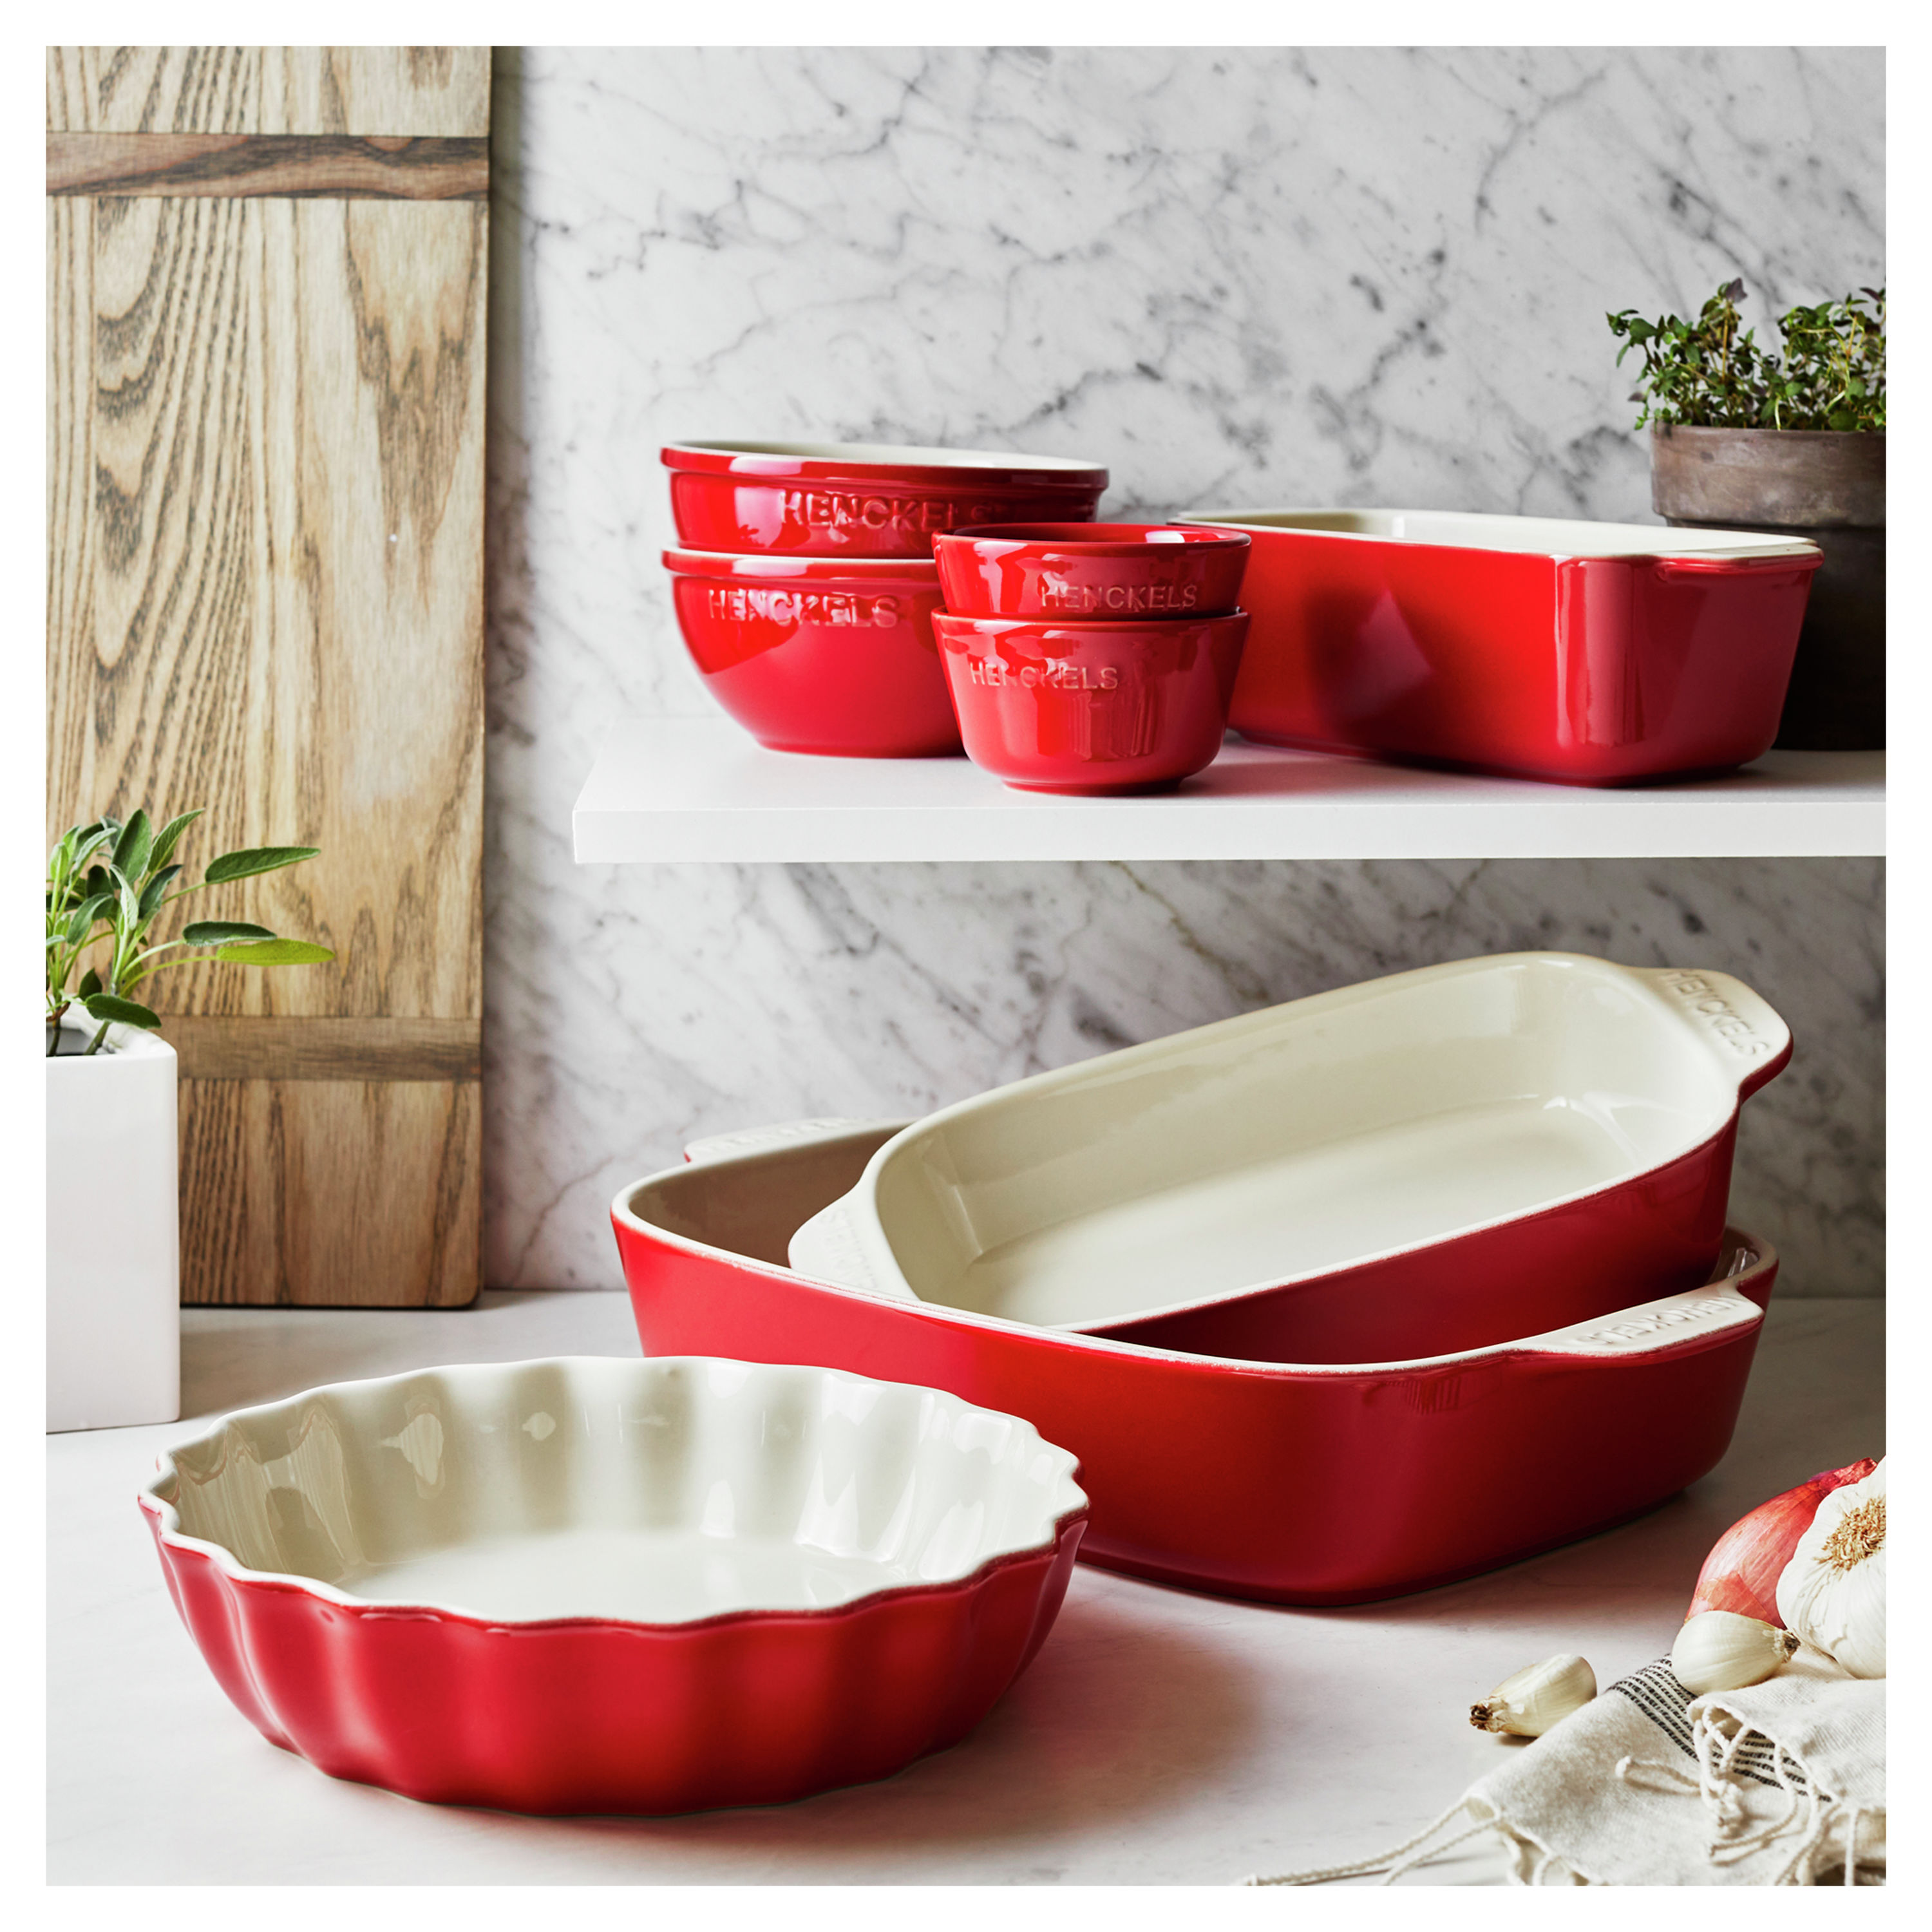 Ceramic Baking Dishes for Oven - Set of 3 (15.6''/12.2''/8.9'')